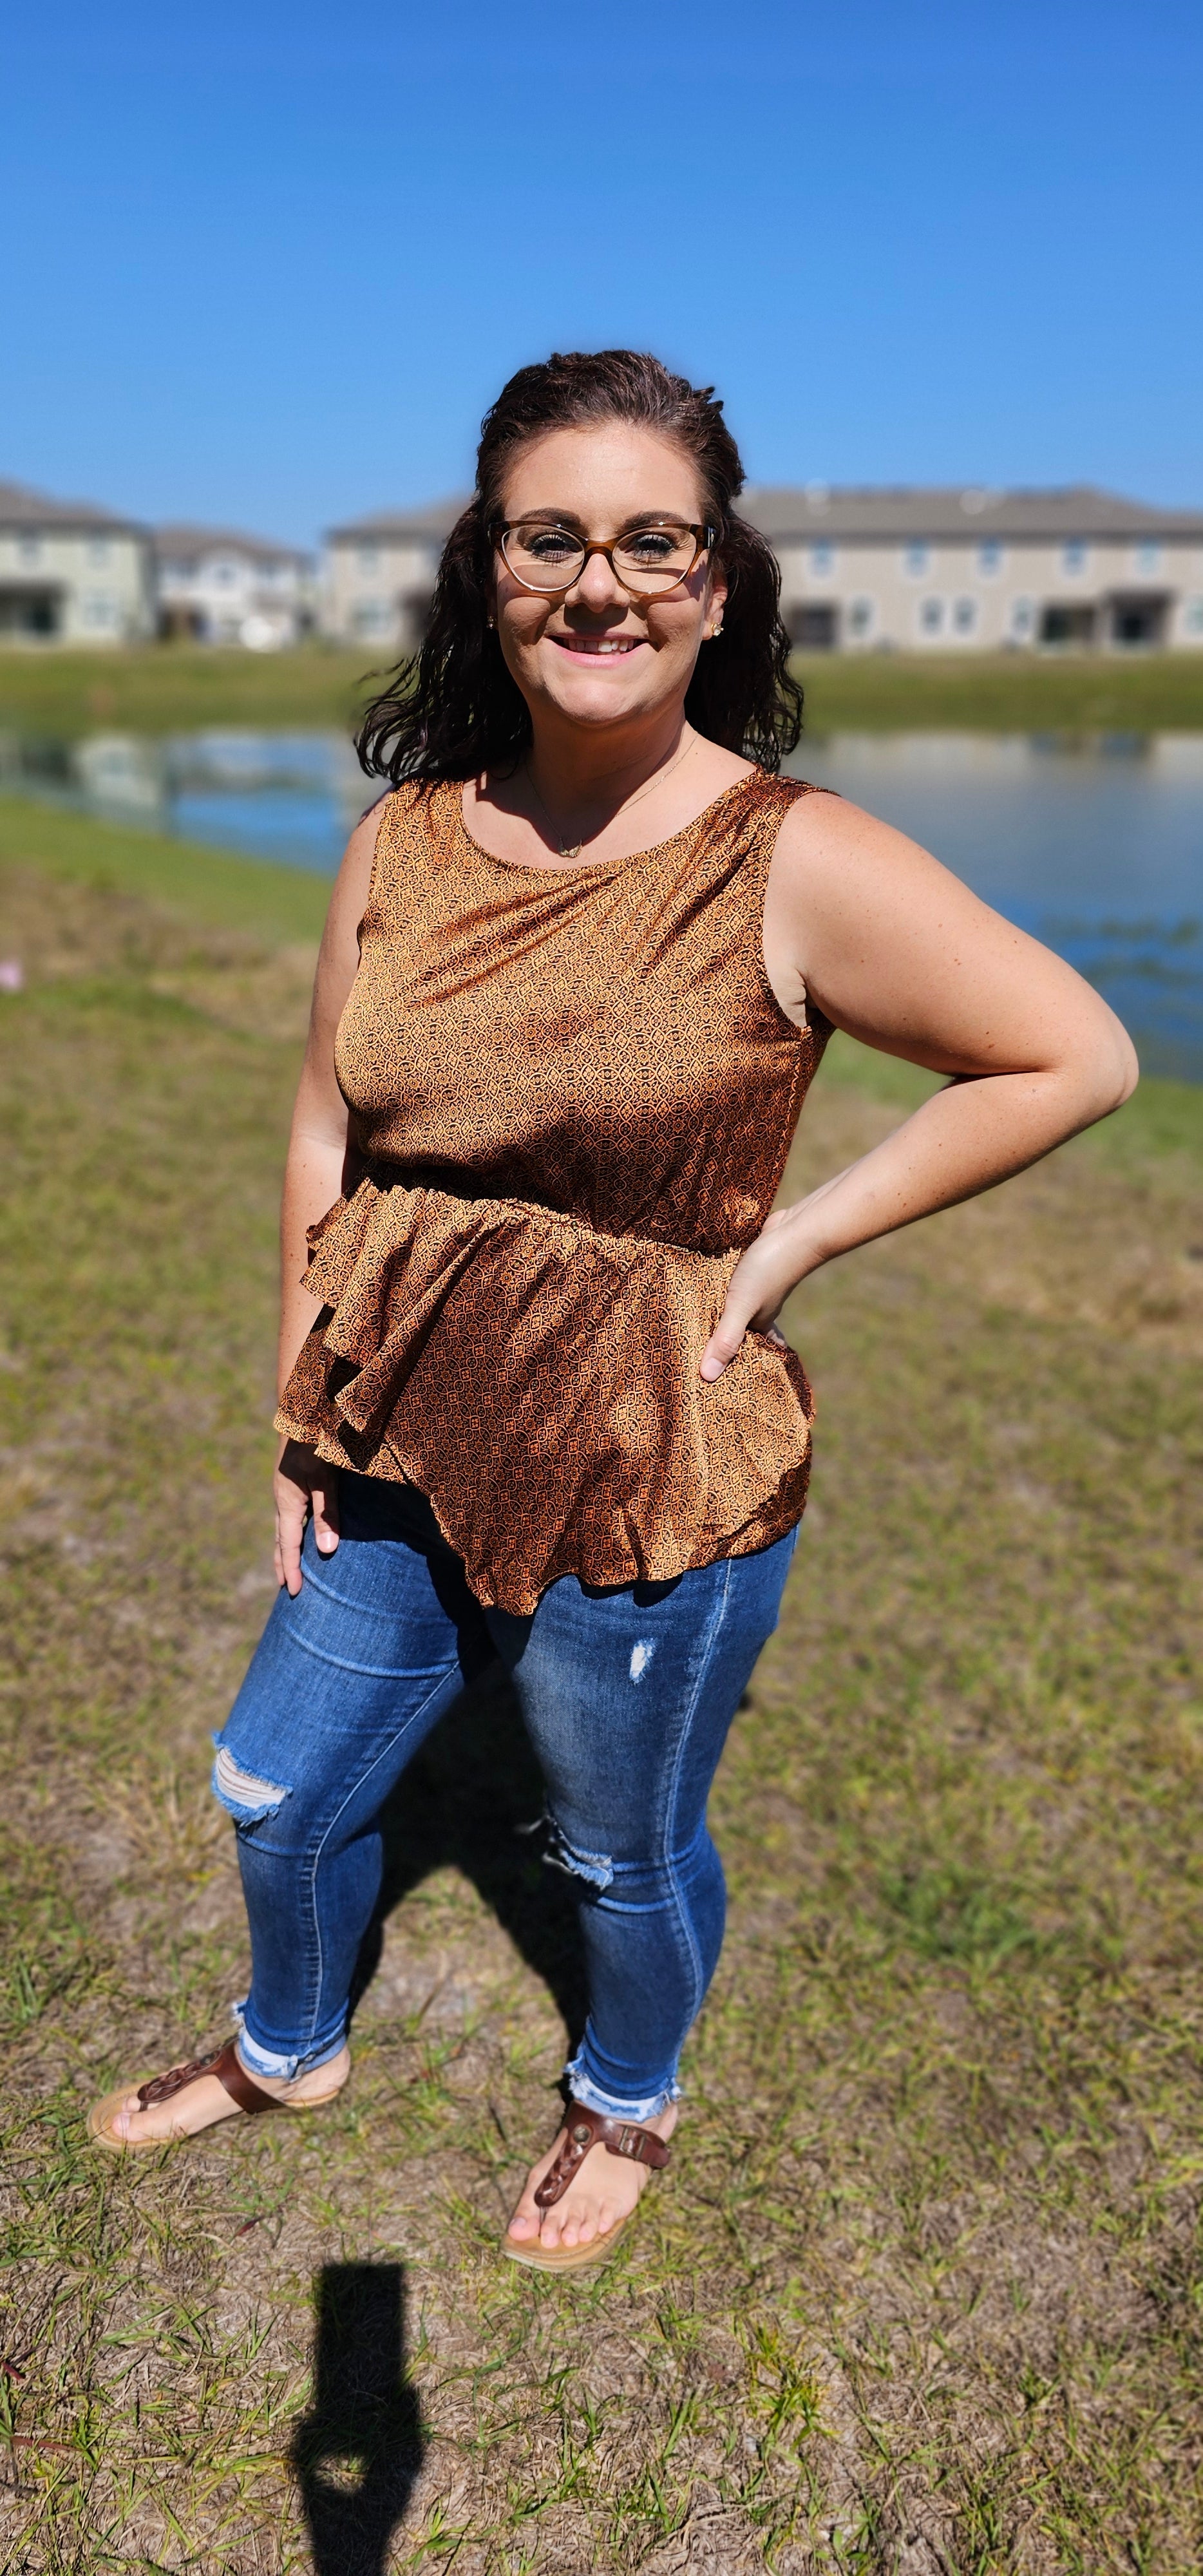 Show off your wild west style with this fashionably rustic "Merida" top! Featuring a beautiful silky satin fabric, an asymmetrical ruffle bottom, an elastic waist, and a keyhole back, you'll be riding off into the sunset in no time! Yee-haw! Sizes small through large.